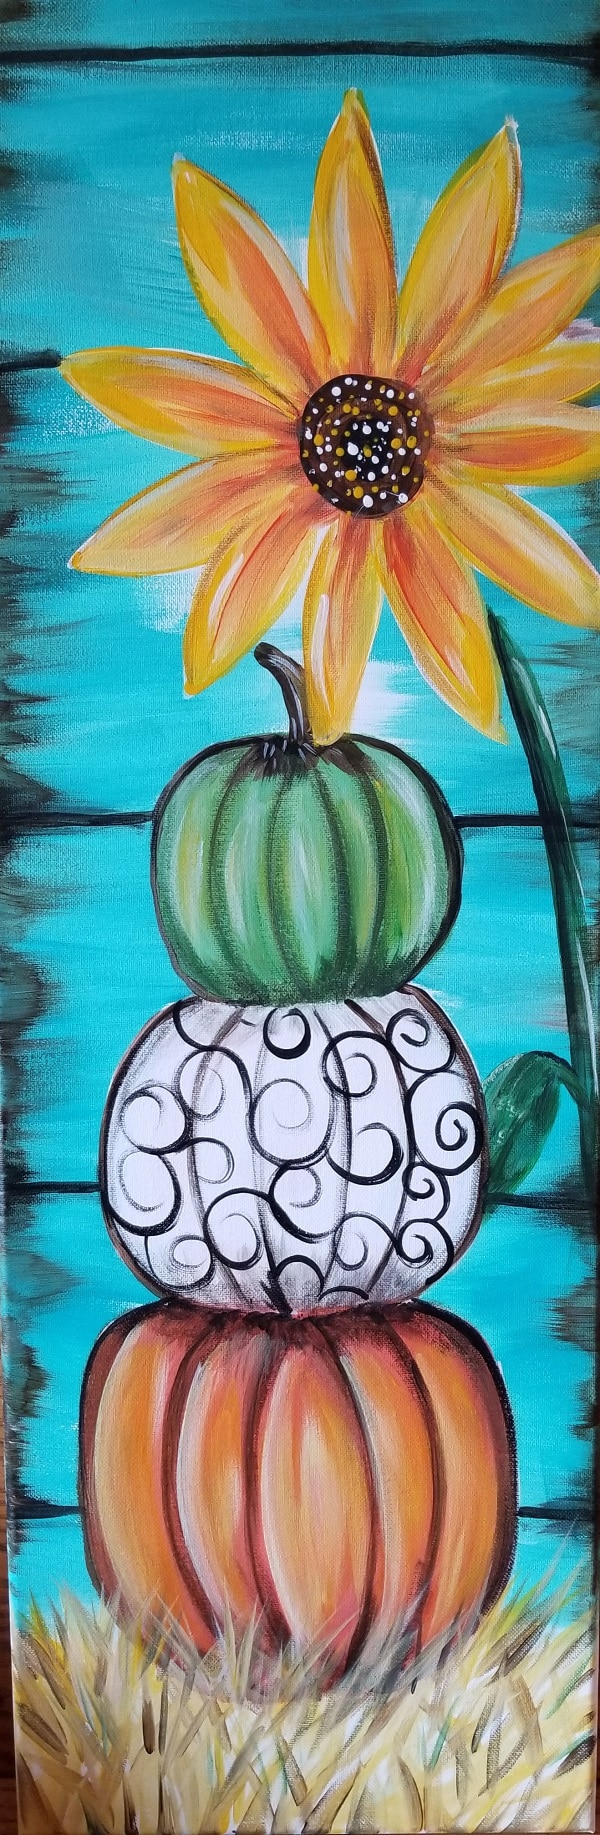 Pumpkin Stack Painting Class at Rock N RoosterThe Official Pigeon Forge Chamber of Commerce